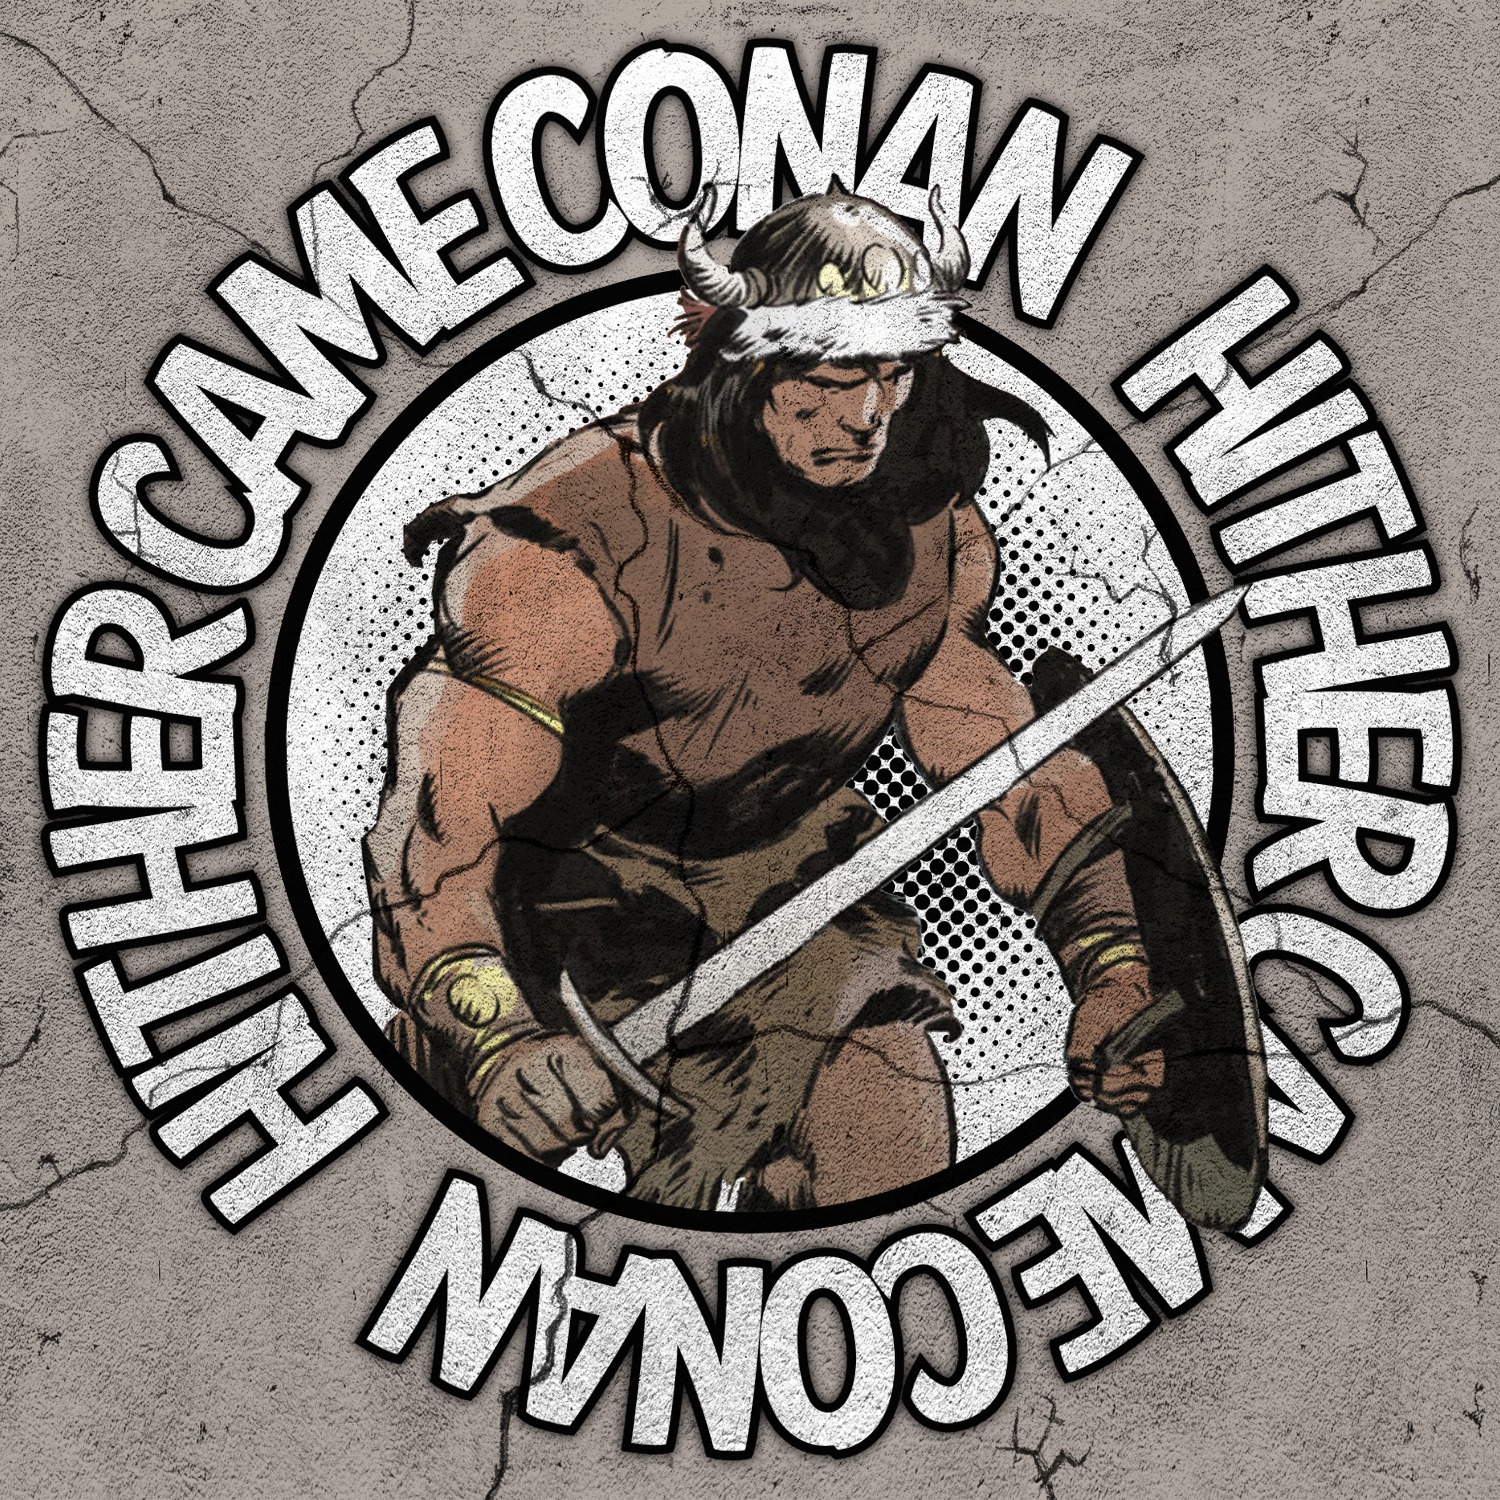 Hither Came Conan: Bob Byrne on “Rogues in the House” – Black Gate